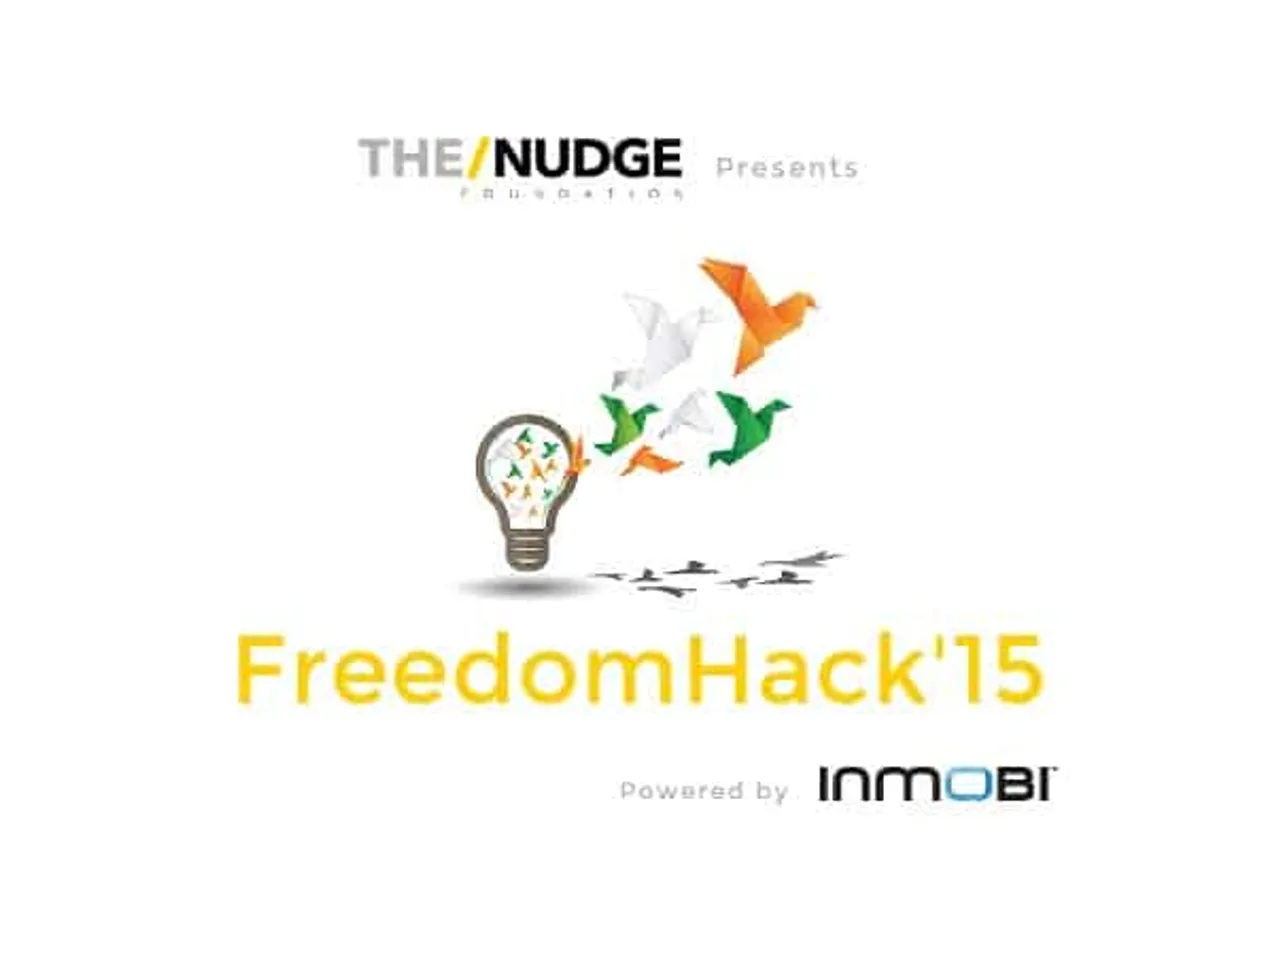 Non profit organization partners with InMobi to launch hackathon for finding practical solutions to social problems